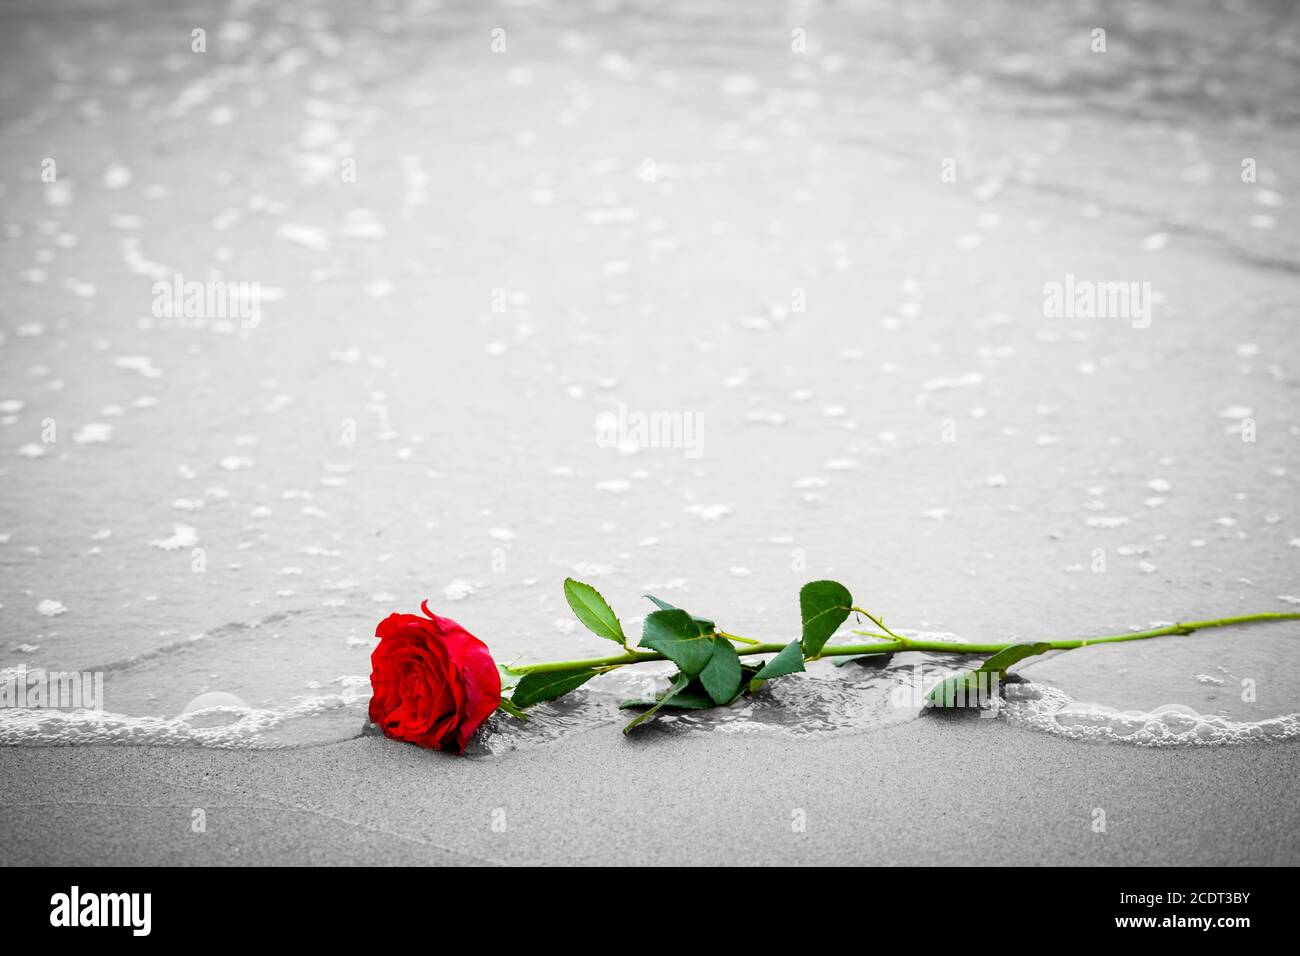 Waves washing away a red rose from the beach. Color against black and white. Love Stock Photo